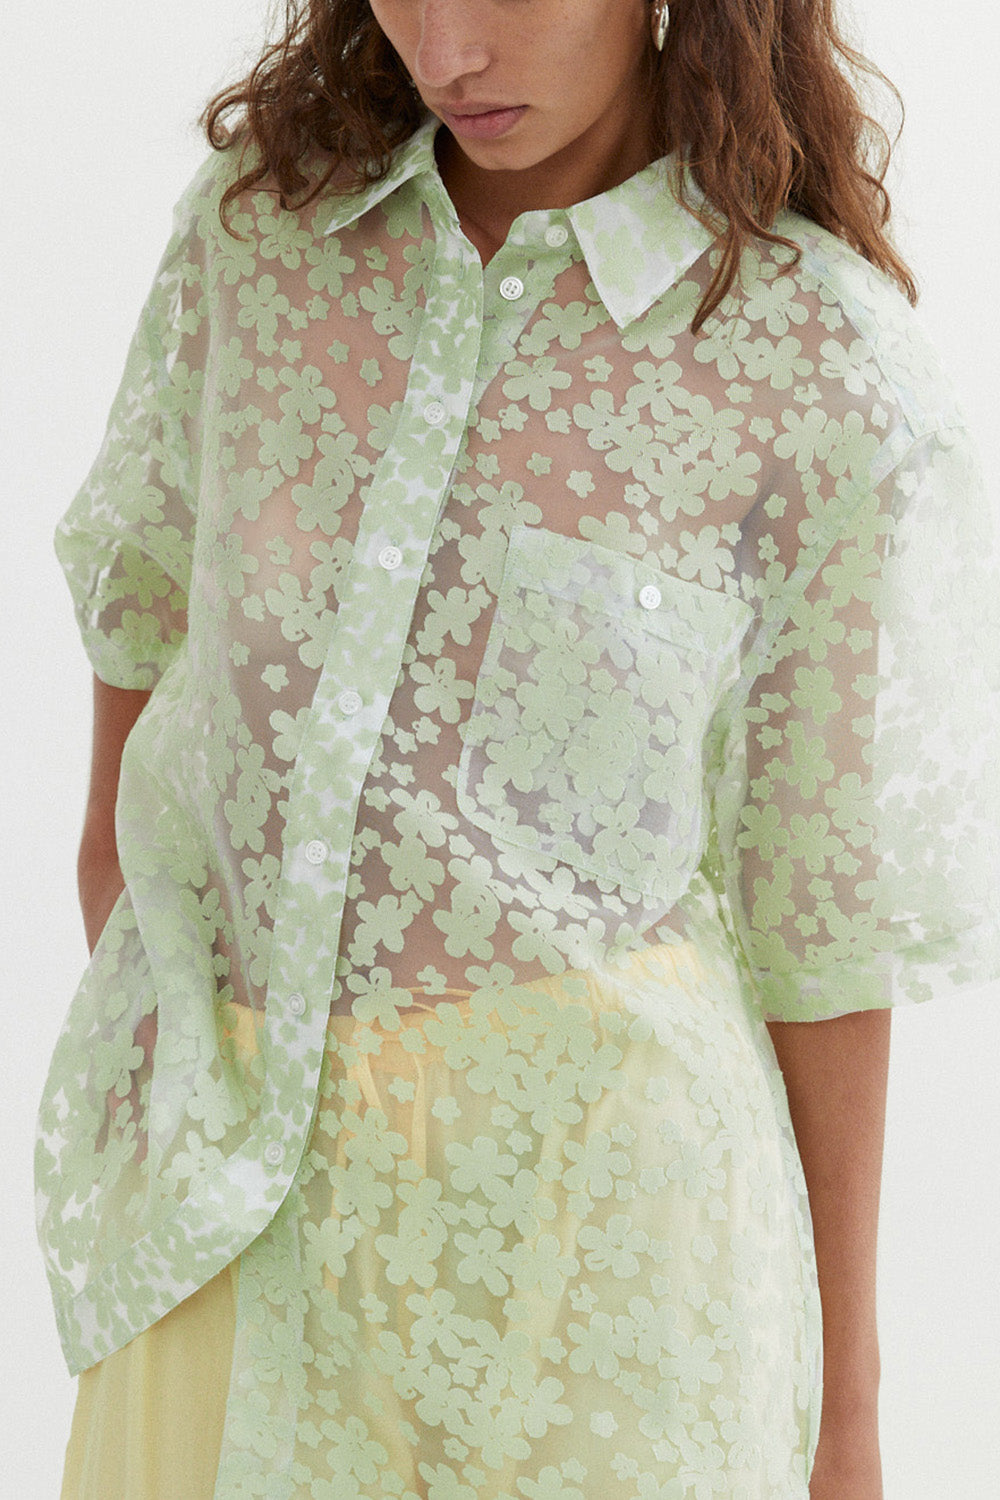 Astra Shirt in Green by BLANCA